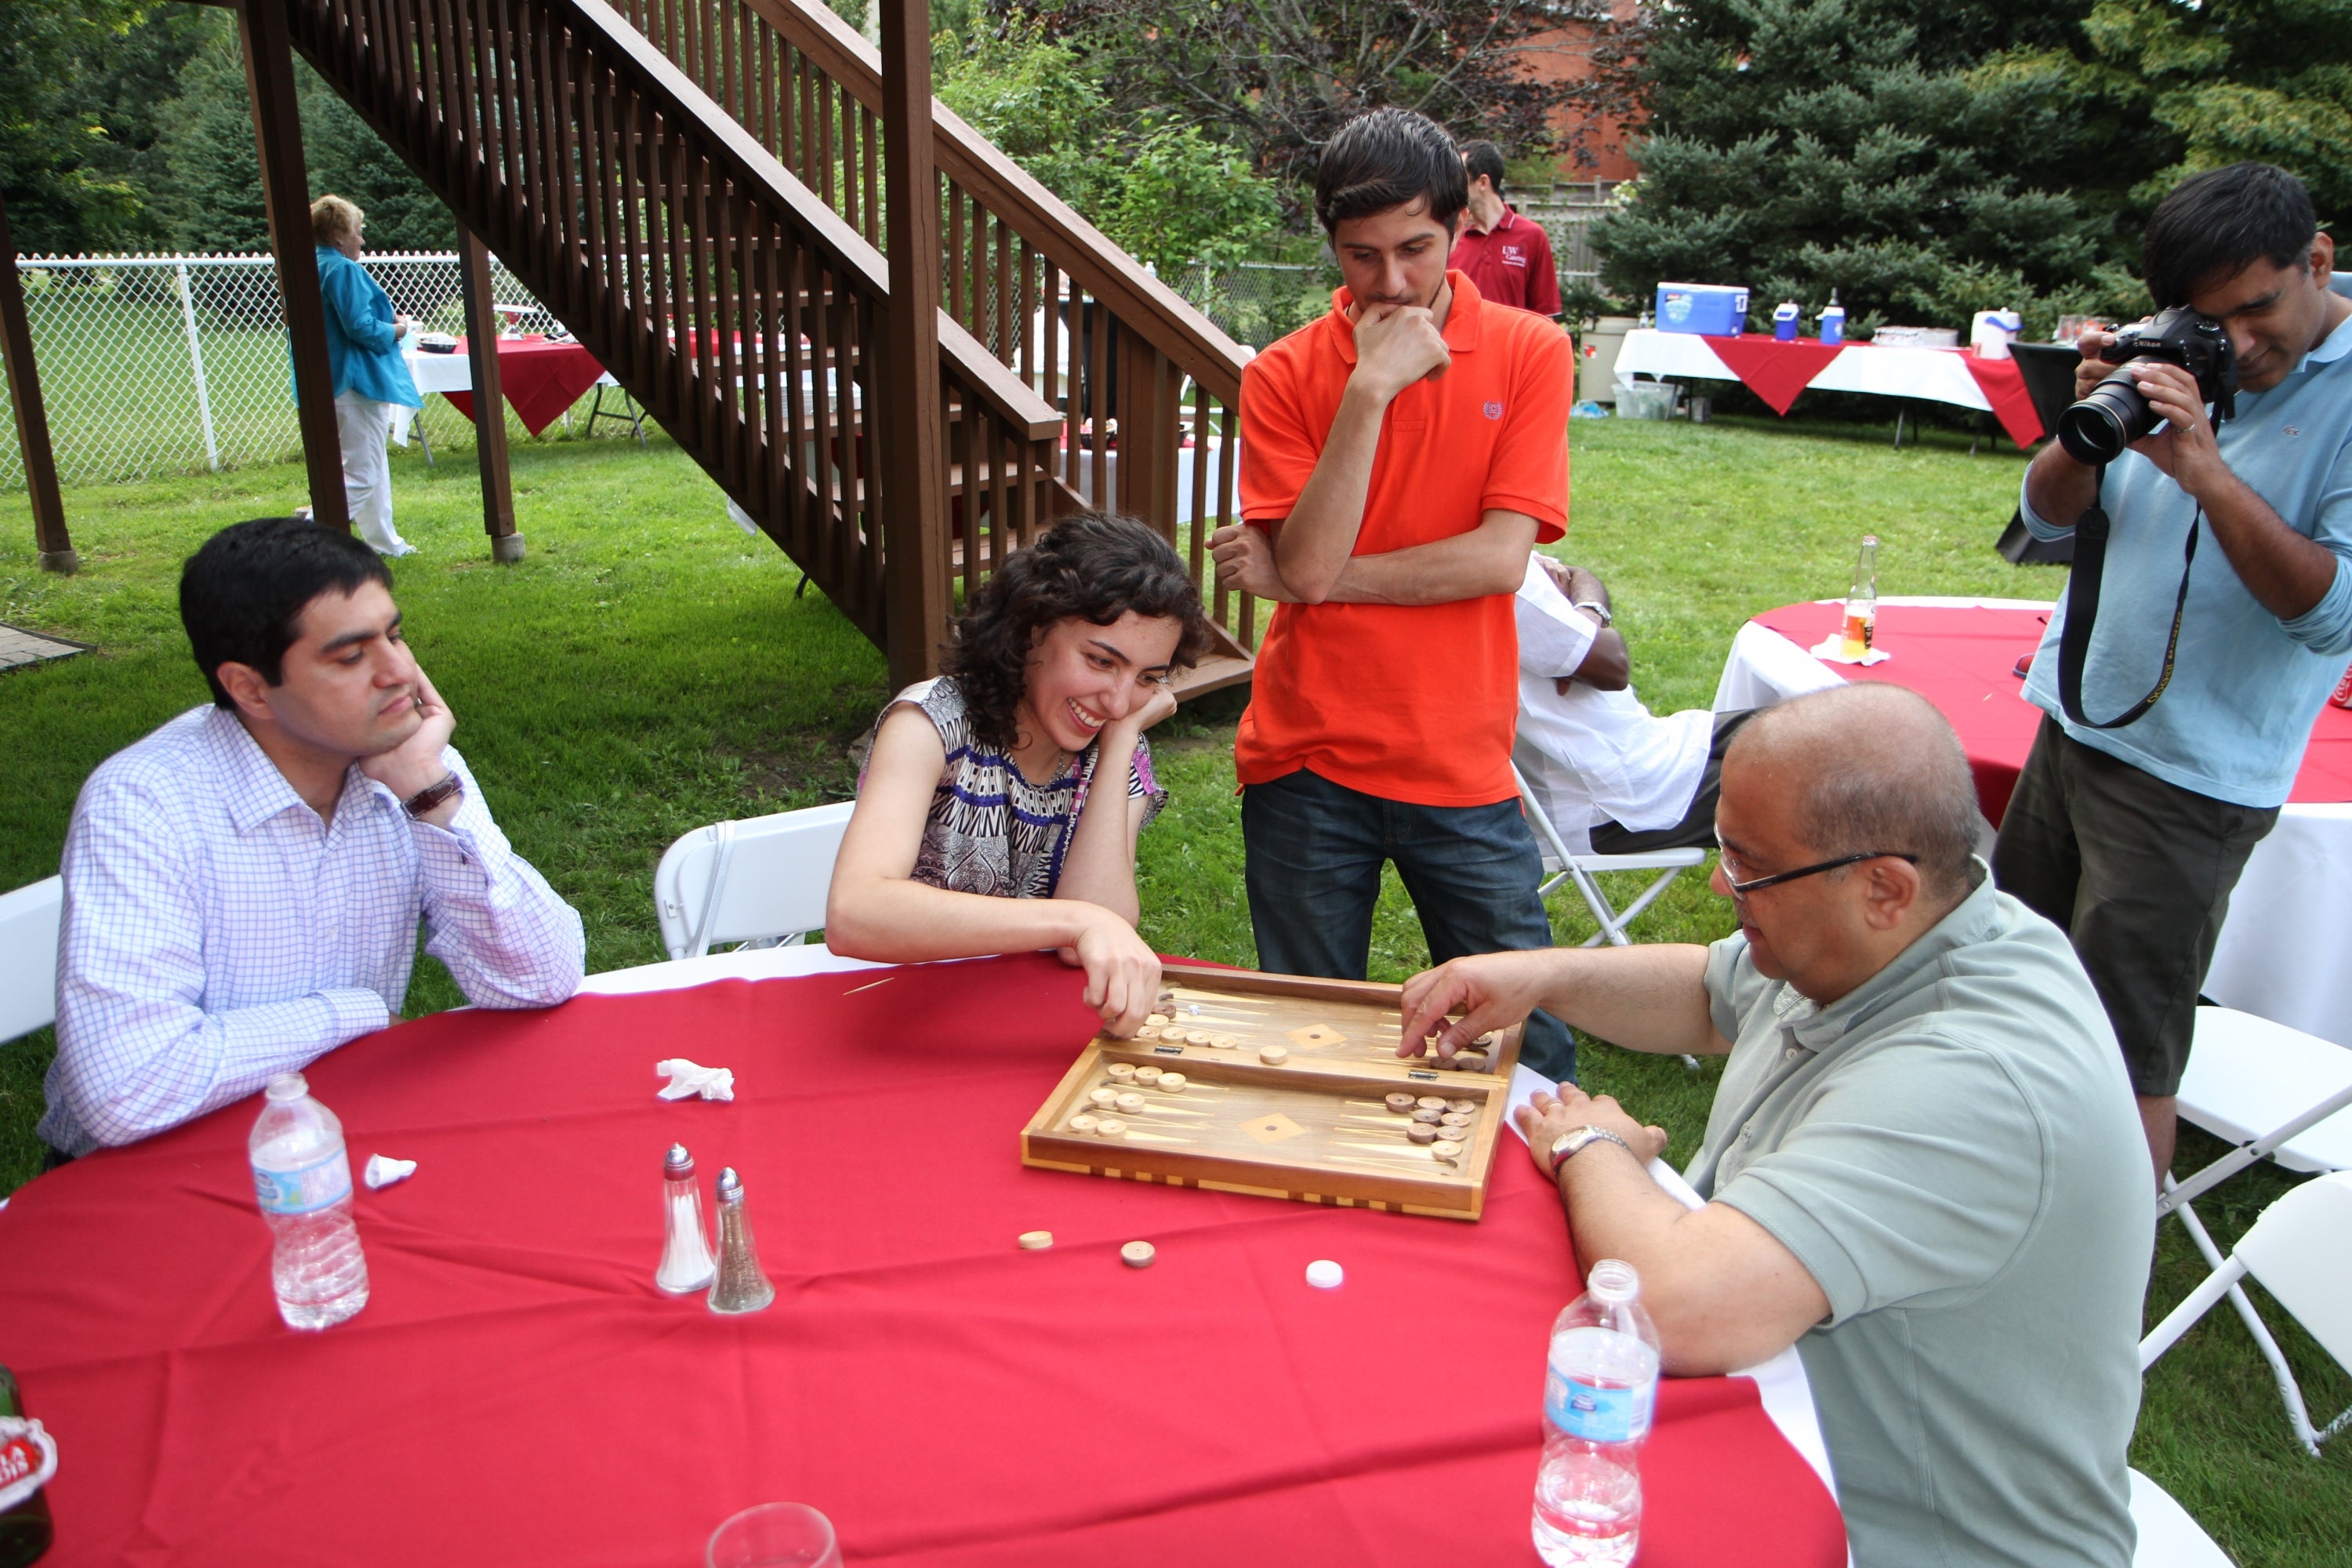 Sormeh and Raafat Mansour playing backgammon